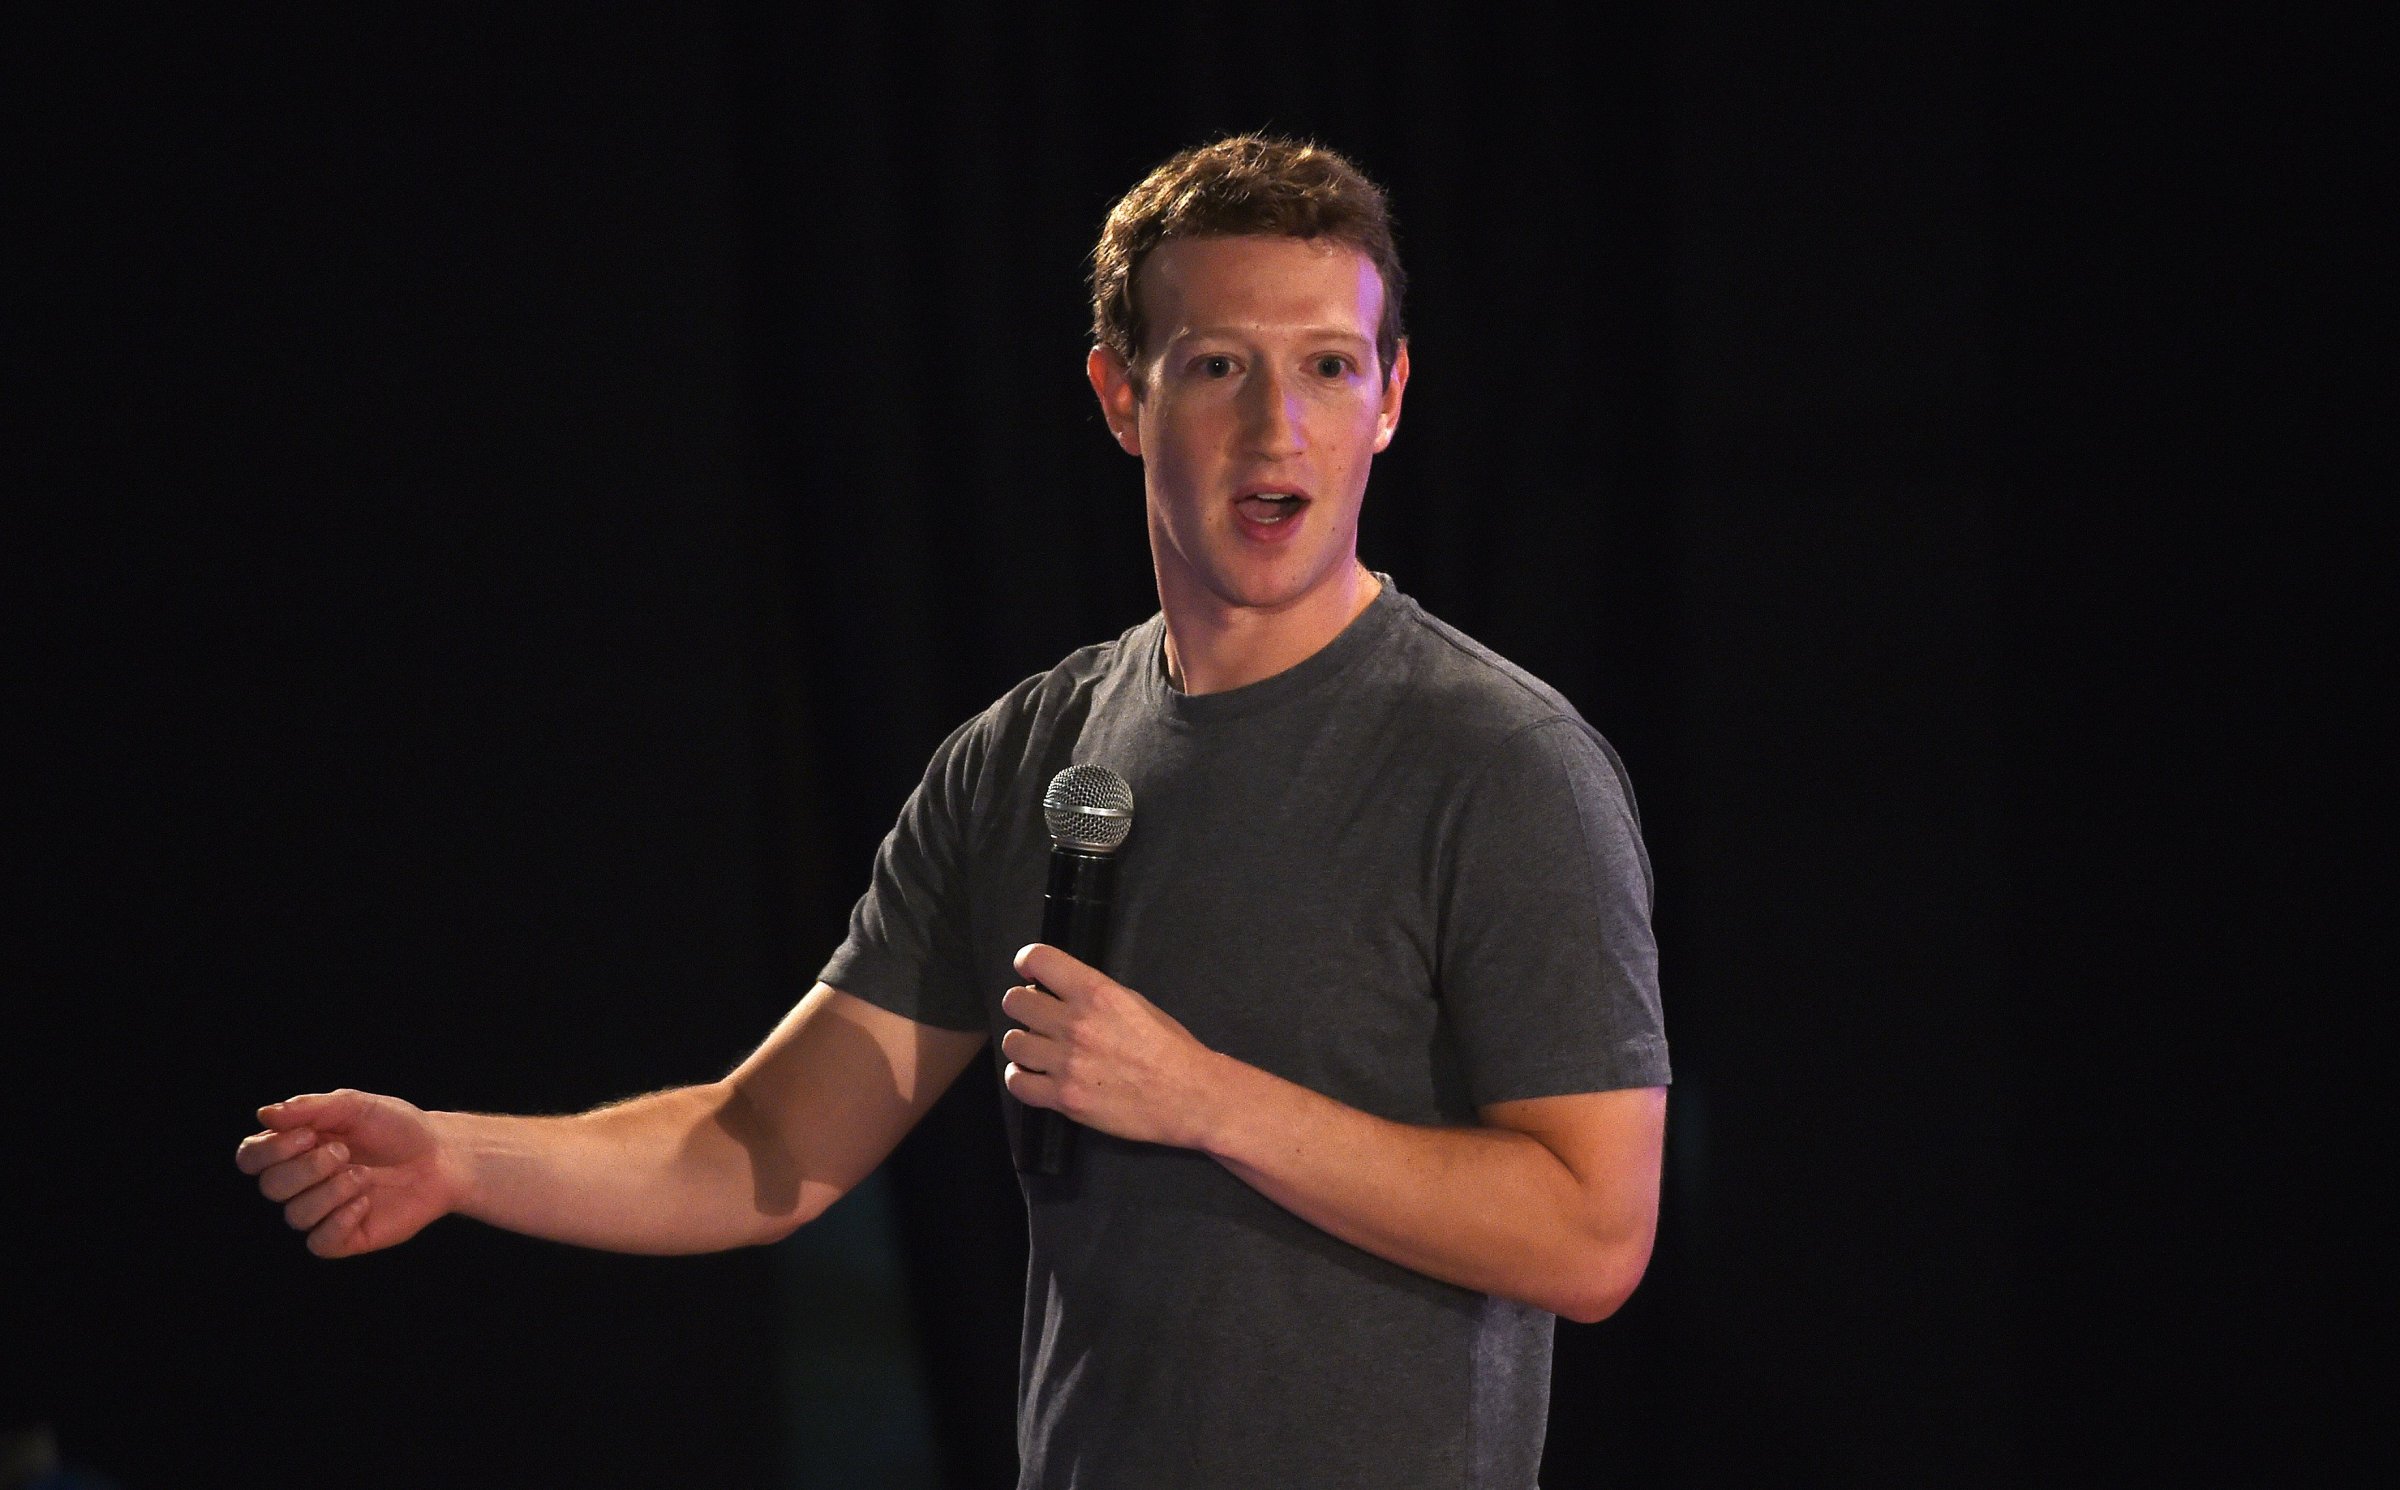 Facebook chief executive and founder Mark Zuckerberg speaks during a 'town-hall' meeting at the Indian Institute of Technology (IIT) in New Delhi on Oct. 28, 2015.